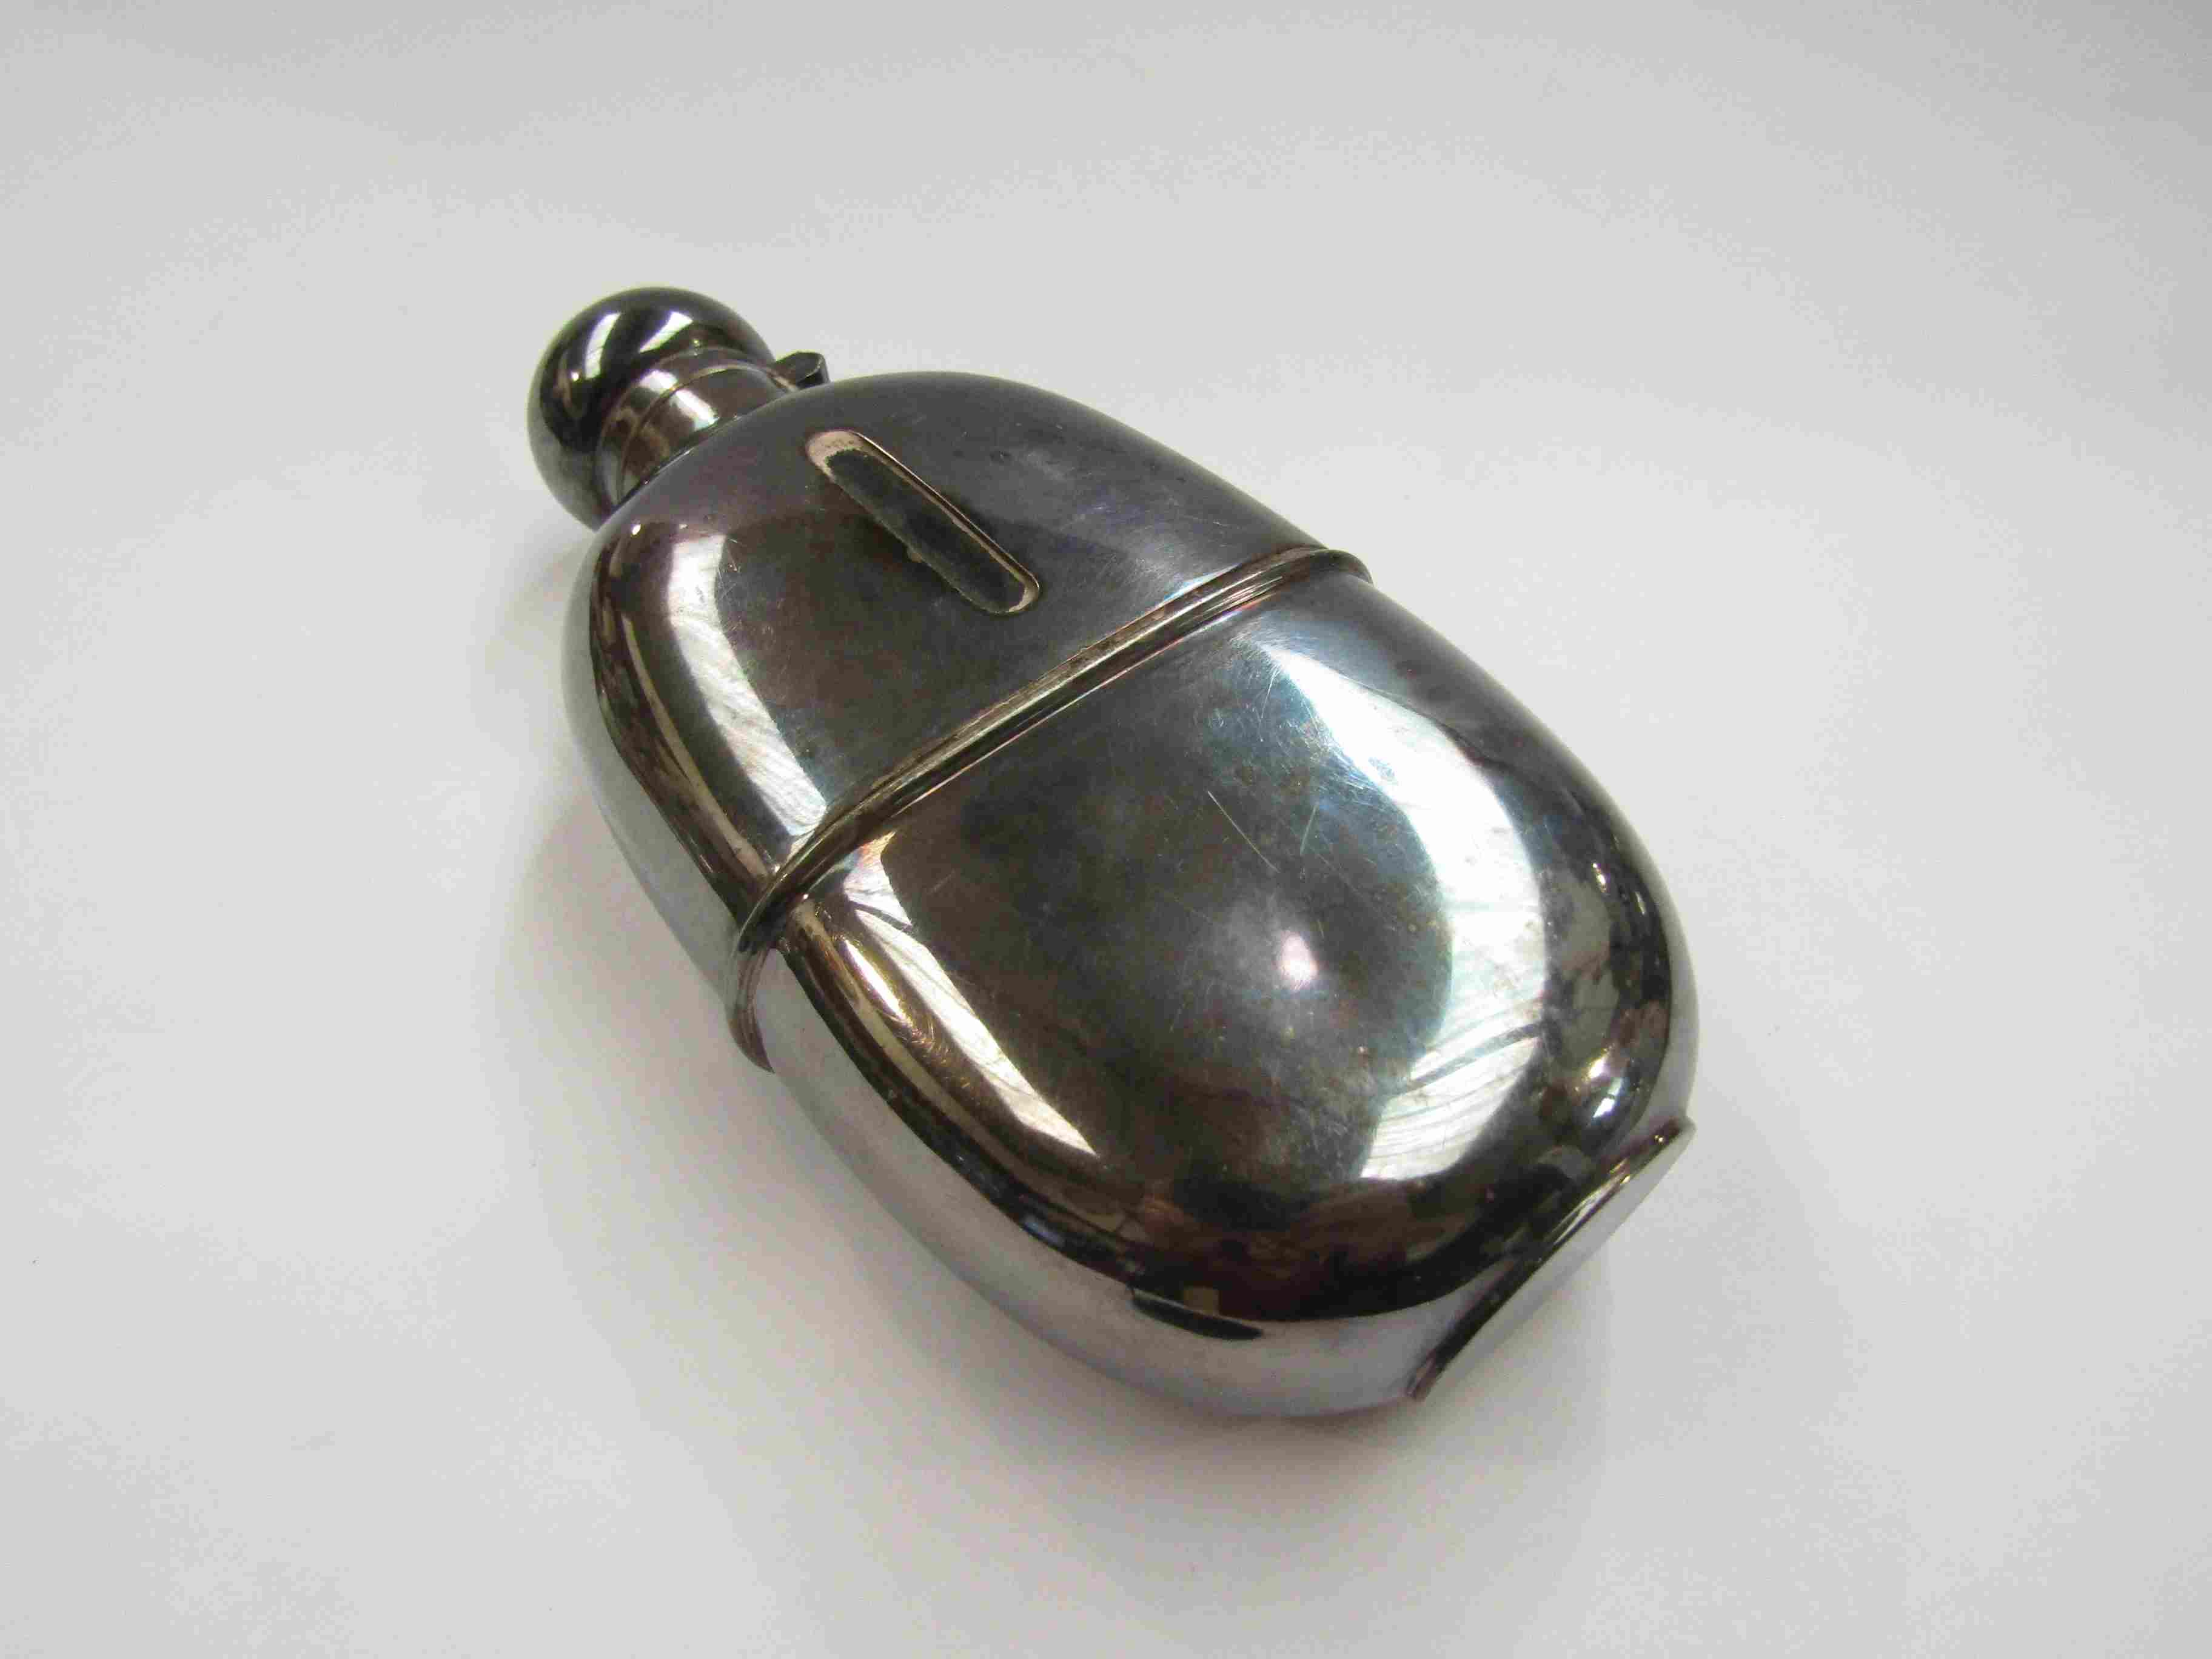 A silverplate hipflask